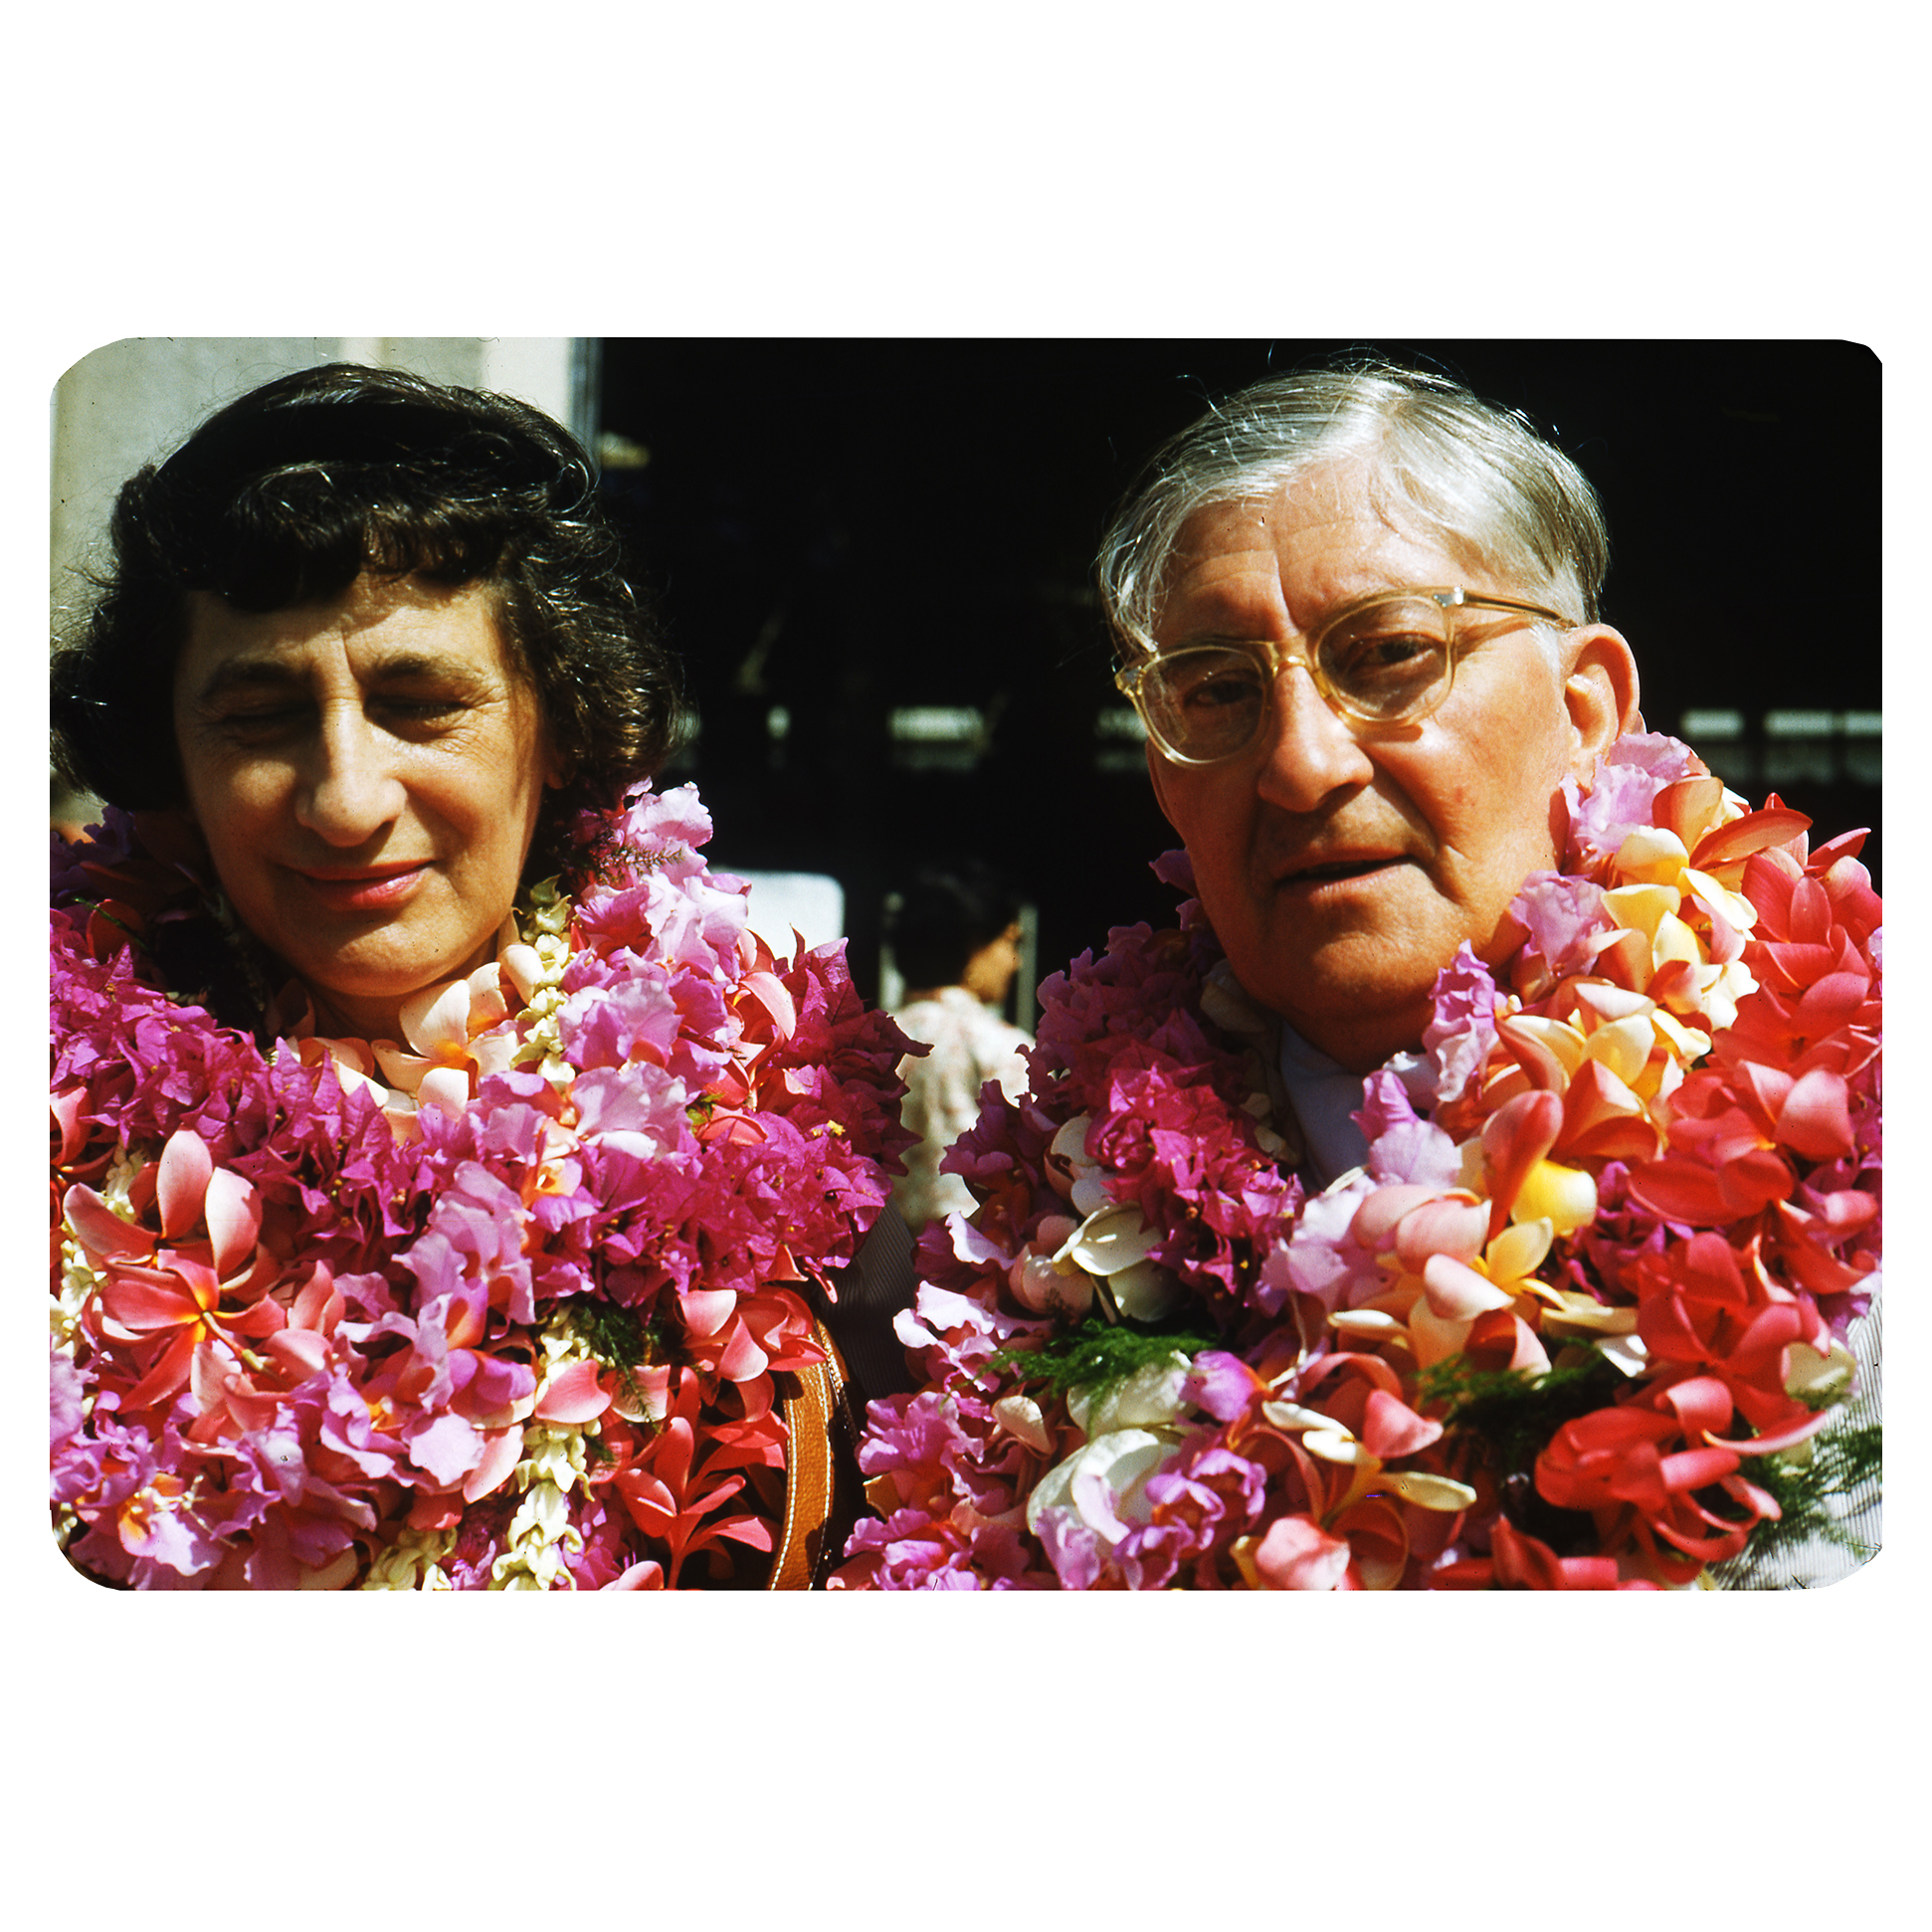 Josef Albers, Photographs of Hawaii, 1954. © 2020 The Josef and Anni Albers Foundation/ARS, NY/DACS.